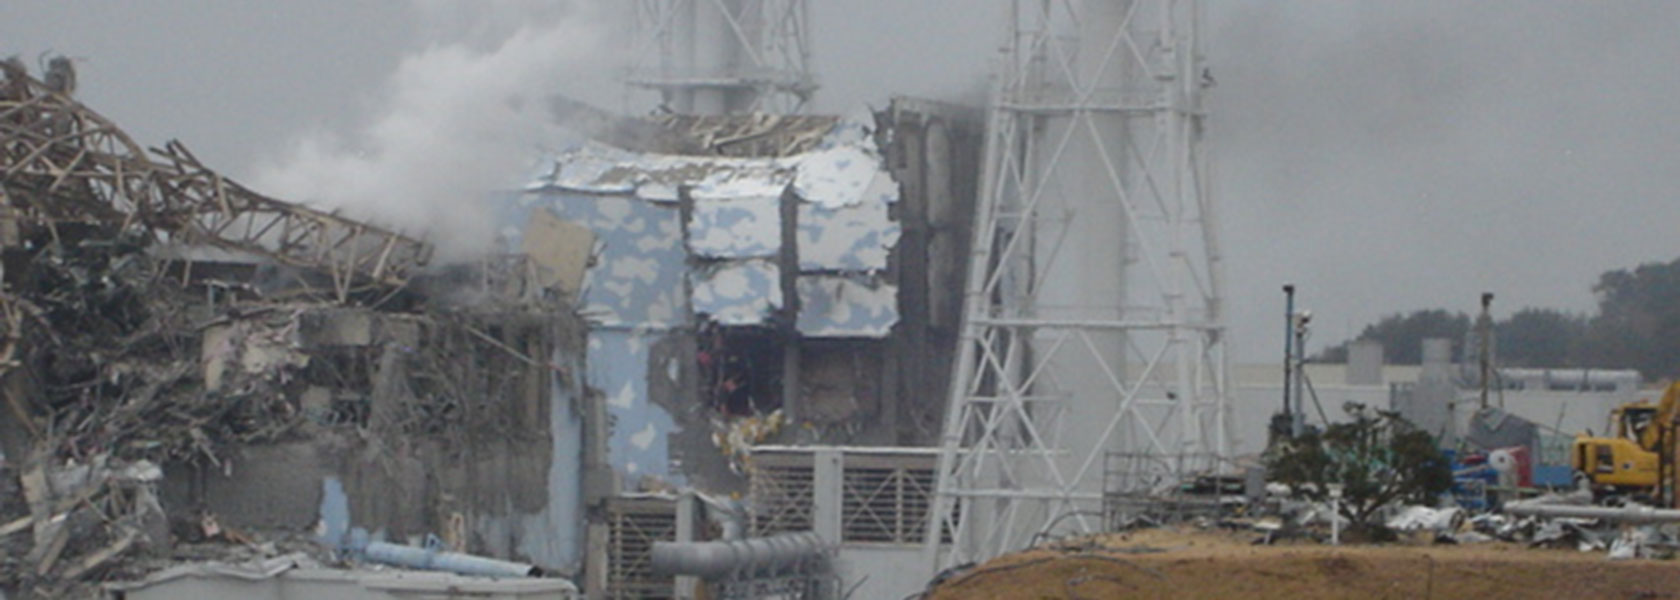 Overview of the nuclear power station accident